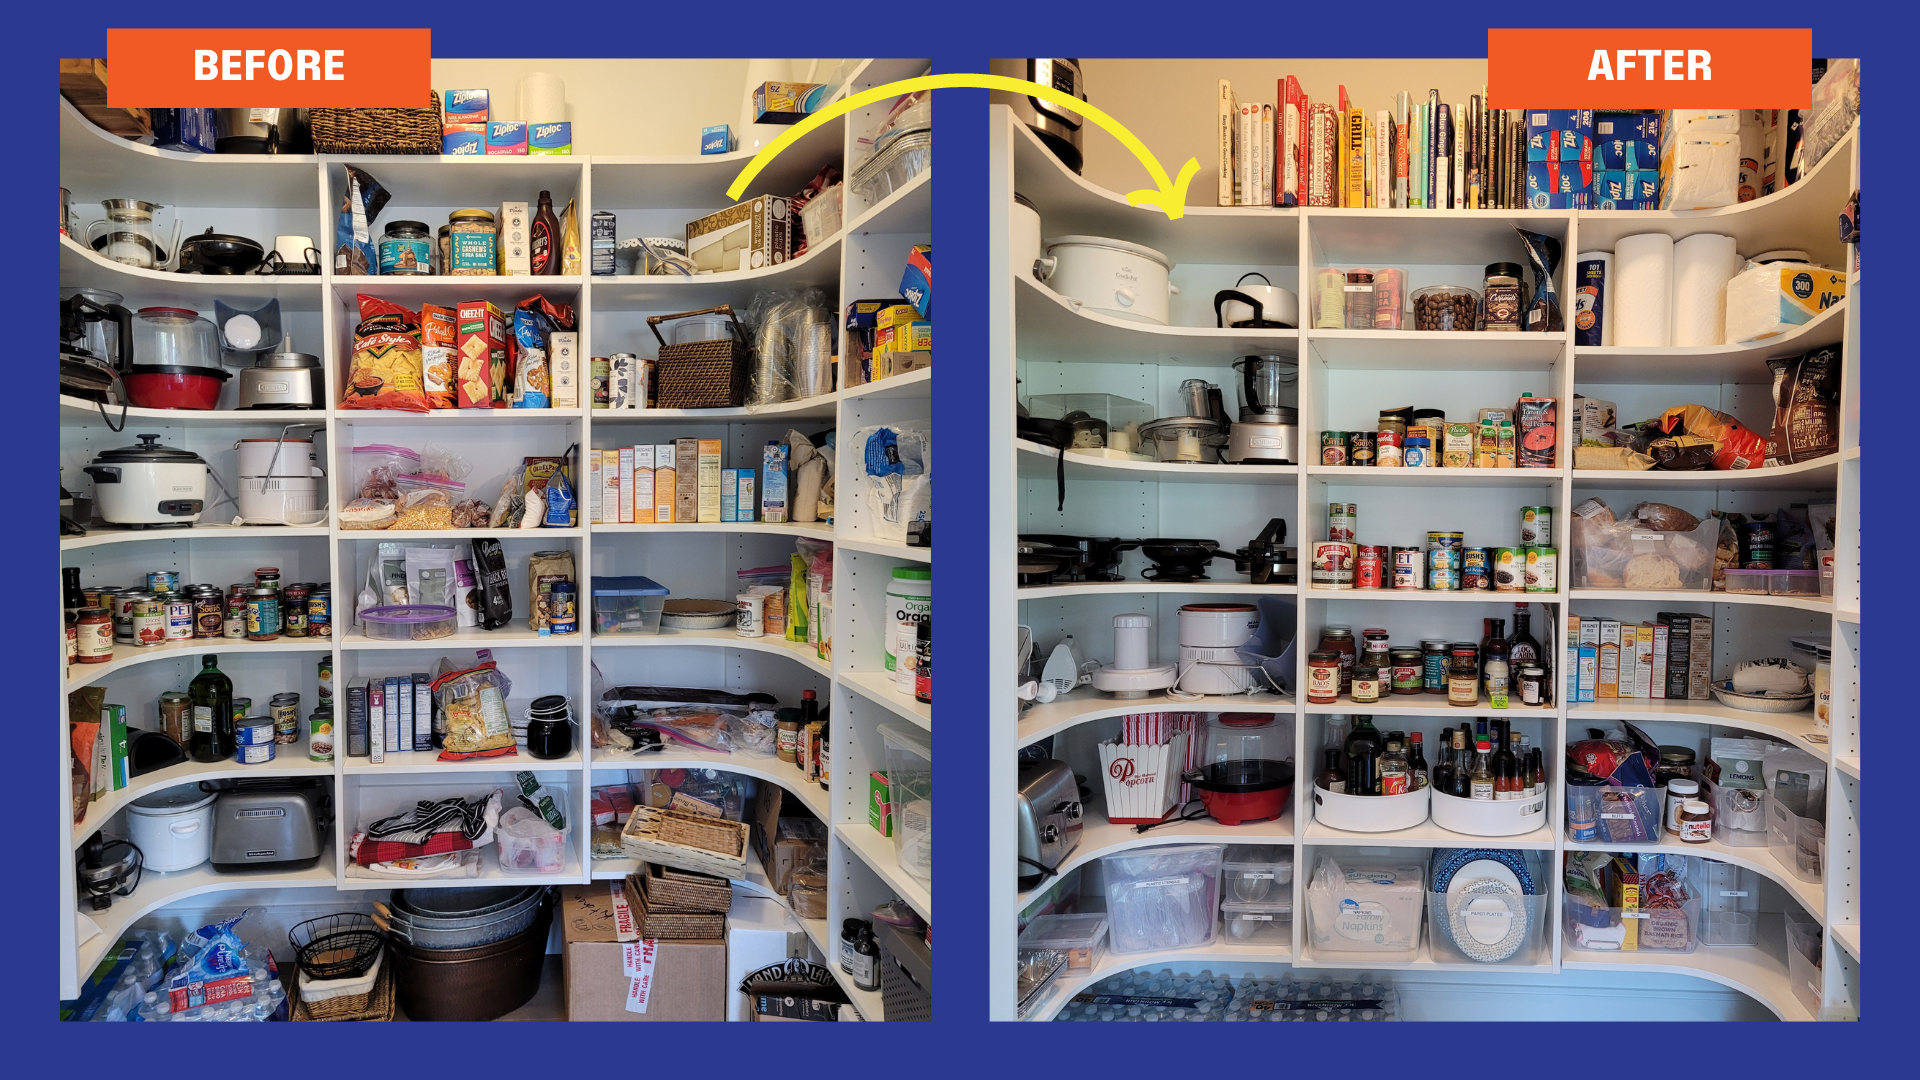 Before and after cleaning a pantry closet. Less clutter and easier to find what you. need in the after image.